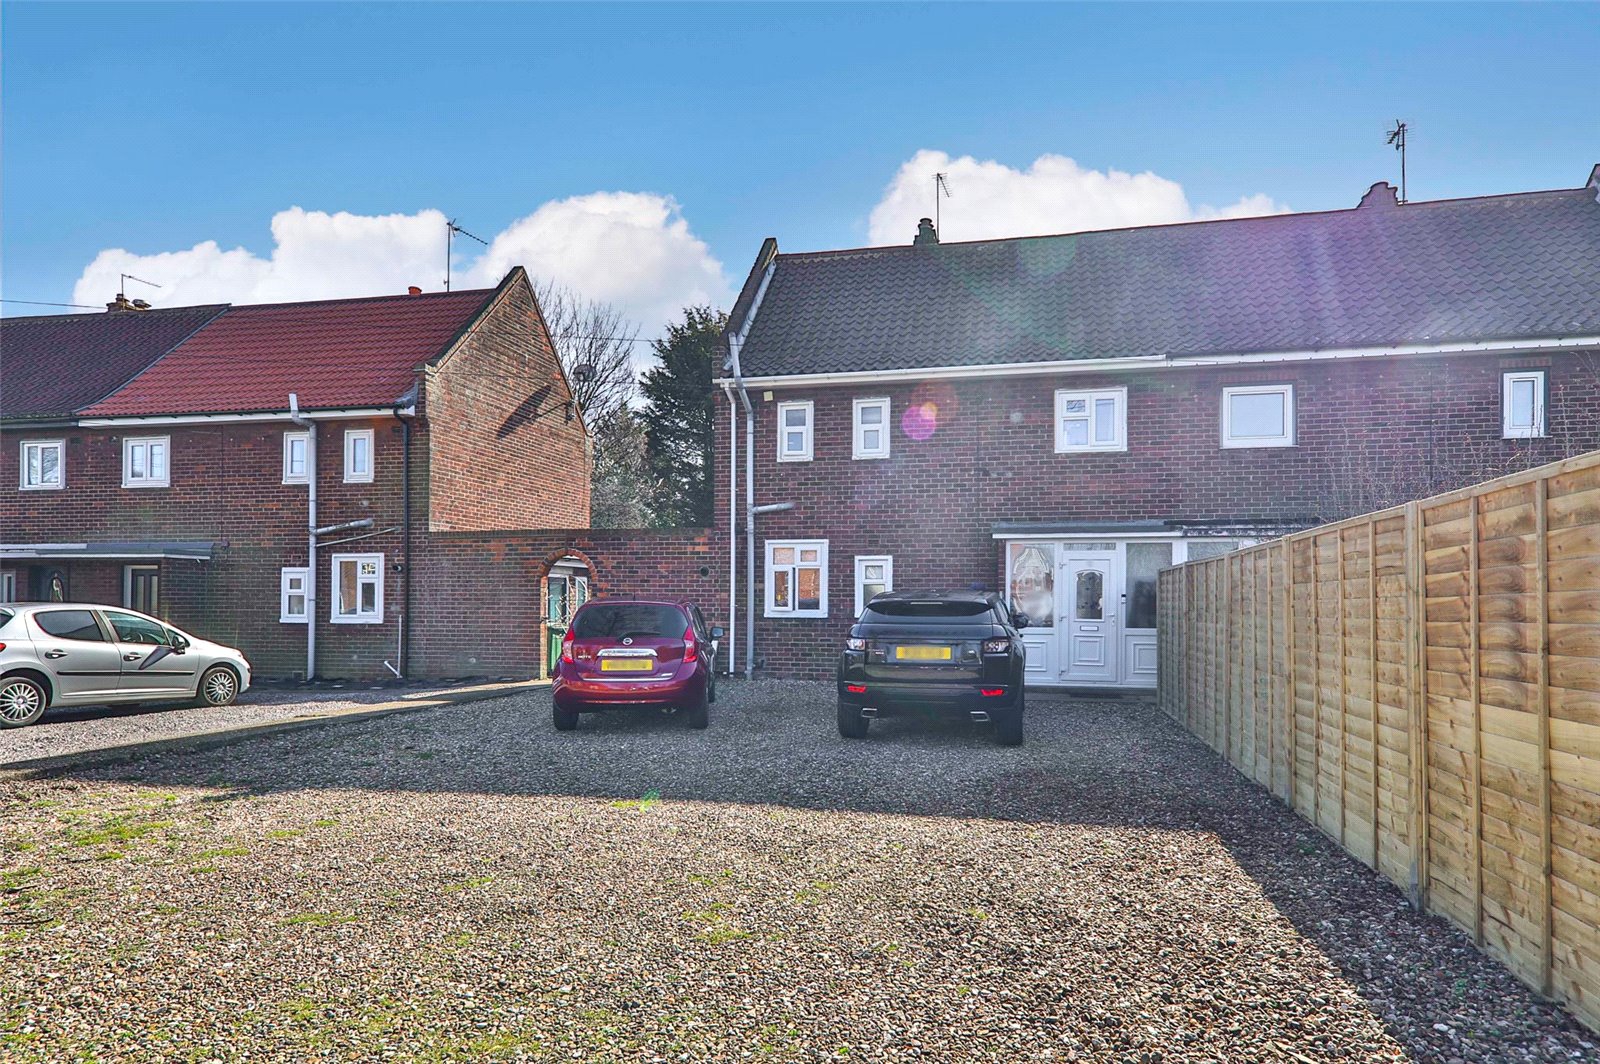 3 bed house for sale in Goths Lane, Beverley, HU17